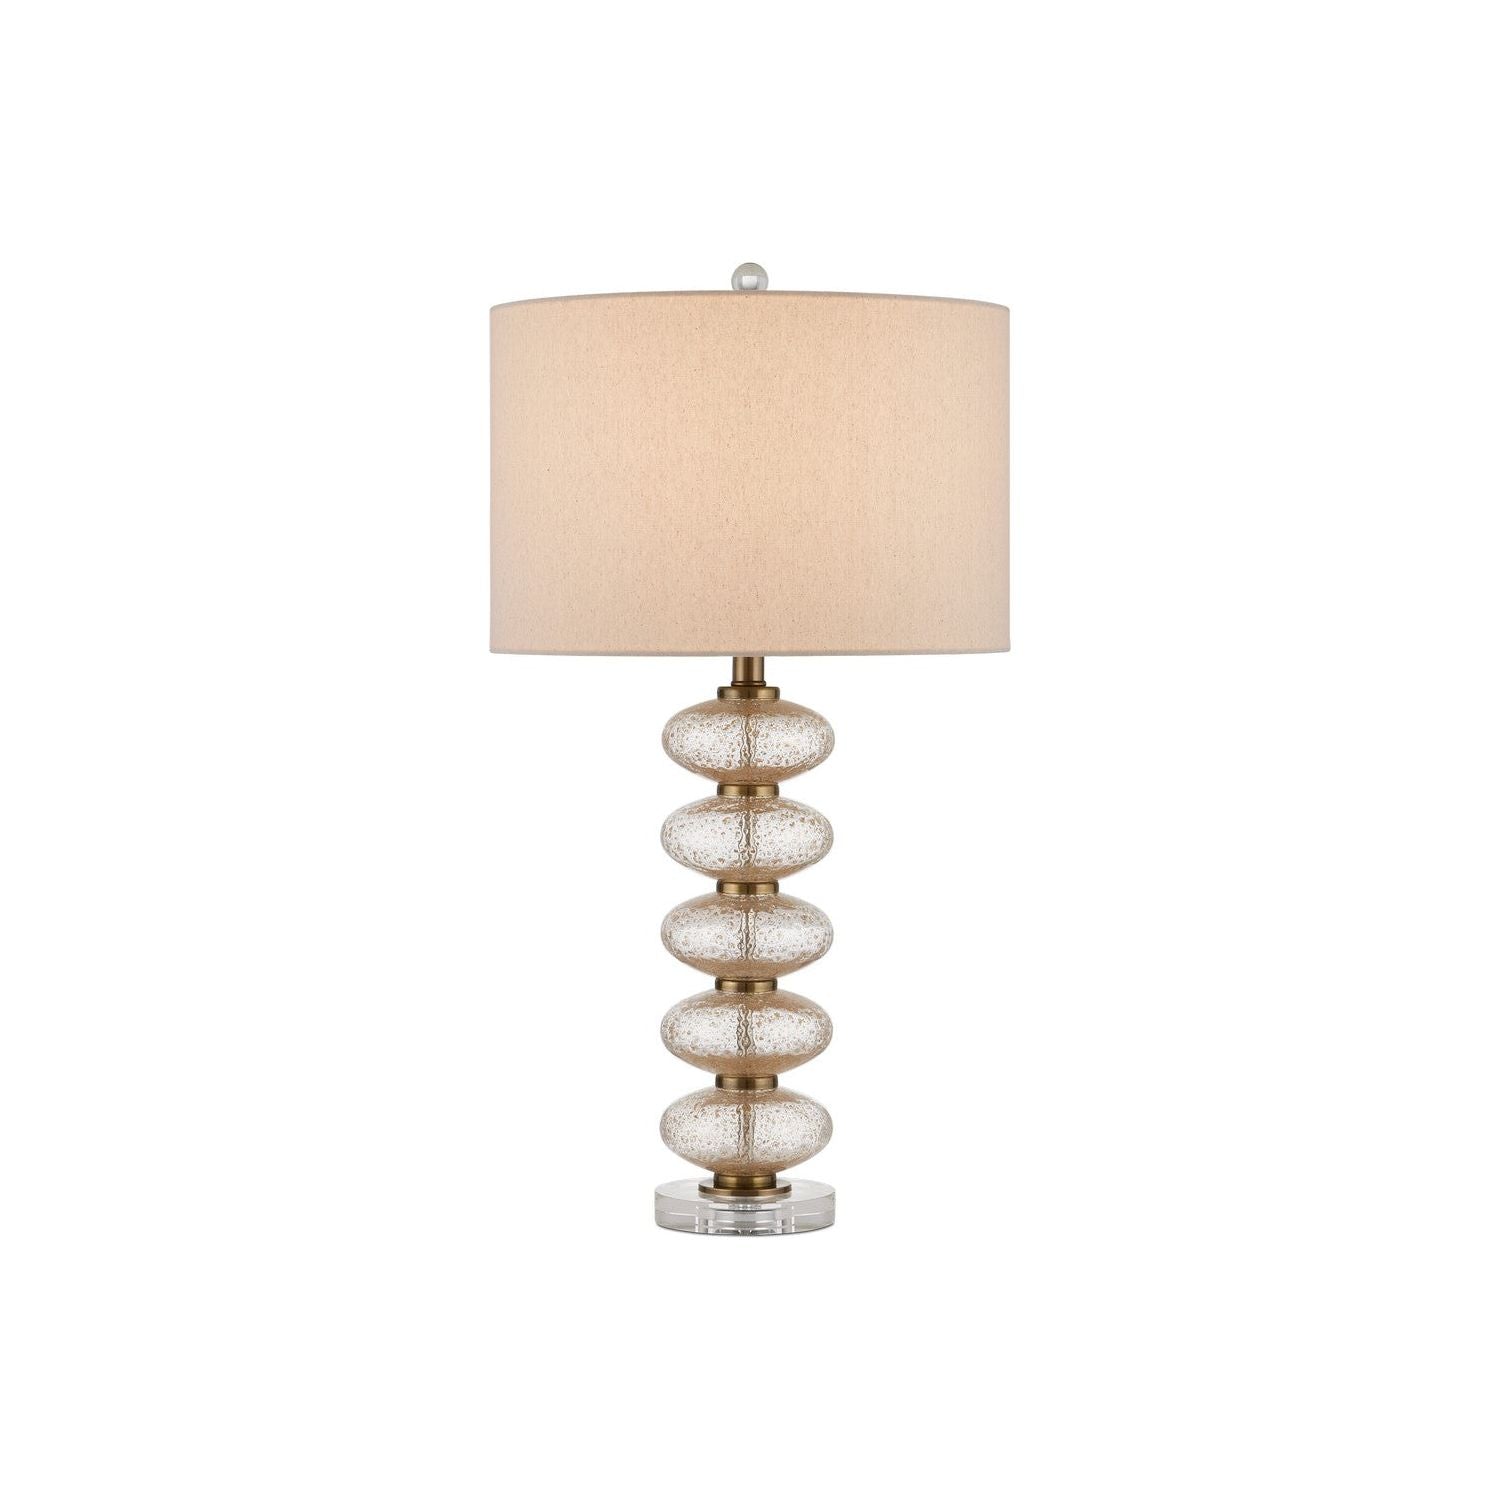 Currey and Company - 6000-0945 - One Light Table Lamp - Clear/Gold/Antique Brass